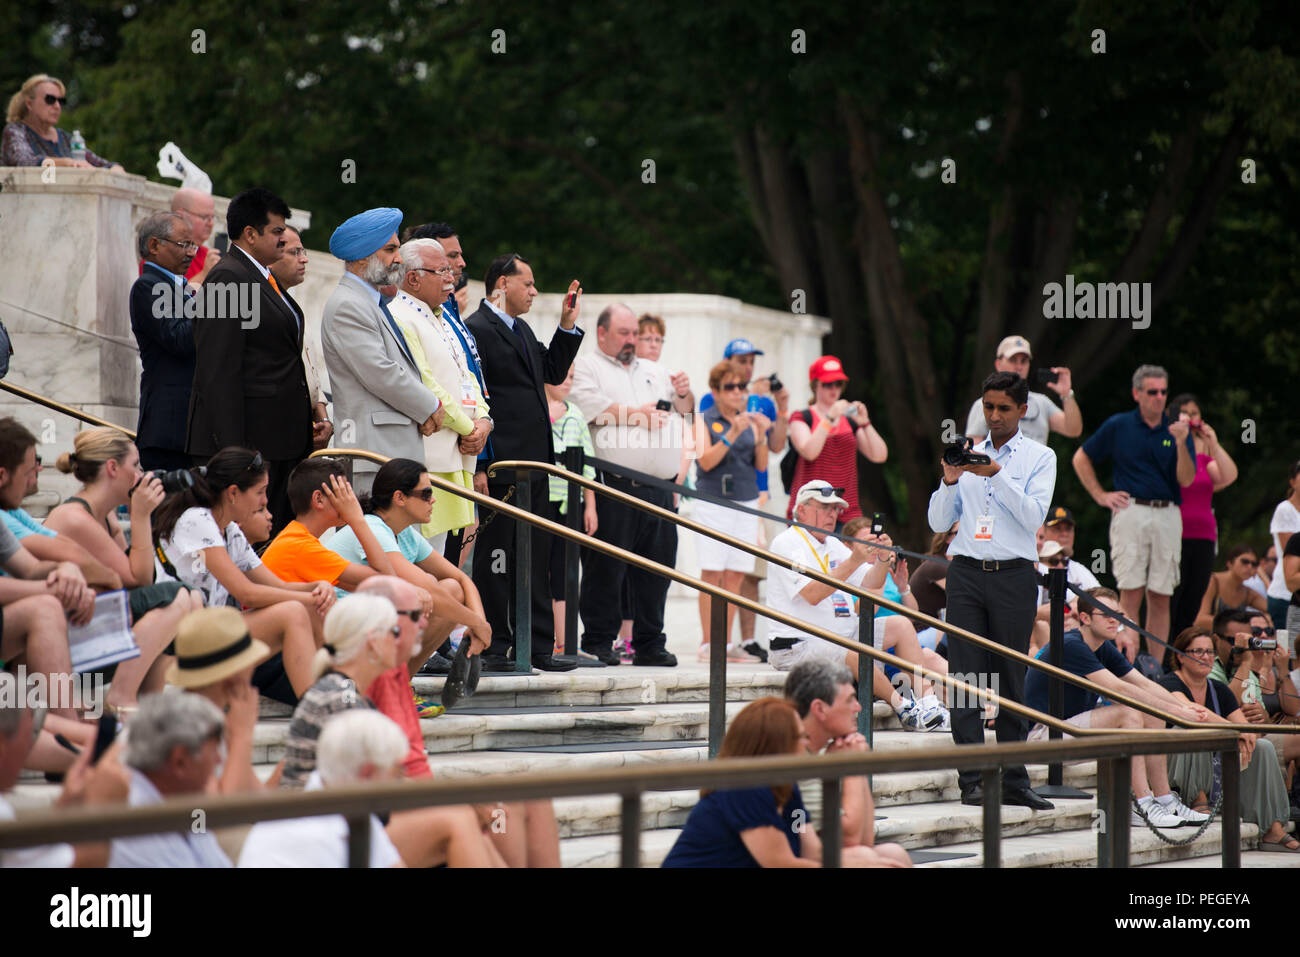 Chief Minister of Haryana, India Manohar Lal Khattar, along with others in the official party and other visitors, watch a Changing of the Guard ceremony at the Tomb of the Unknown Soldier in Arlington National Cemetery, Aug. 18, 2015, in Arlington, Va., immediately following a wreath-laying at the Space Shuttle Columbia Memorial. Kalpana Chawla, one of seven crew members killed during the Columbia disaster, was born in Karnal, India and was posthumously awarded the Congressional Space Medal of Honor, the NASA Space Flight Medal, and the NASA Distinguished Service Medal. (U.S. Army photo by Rac Stock Photo